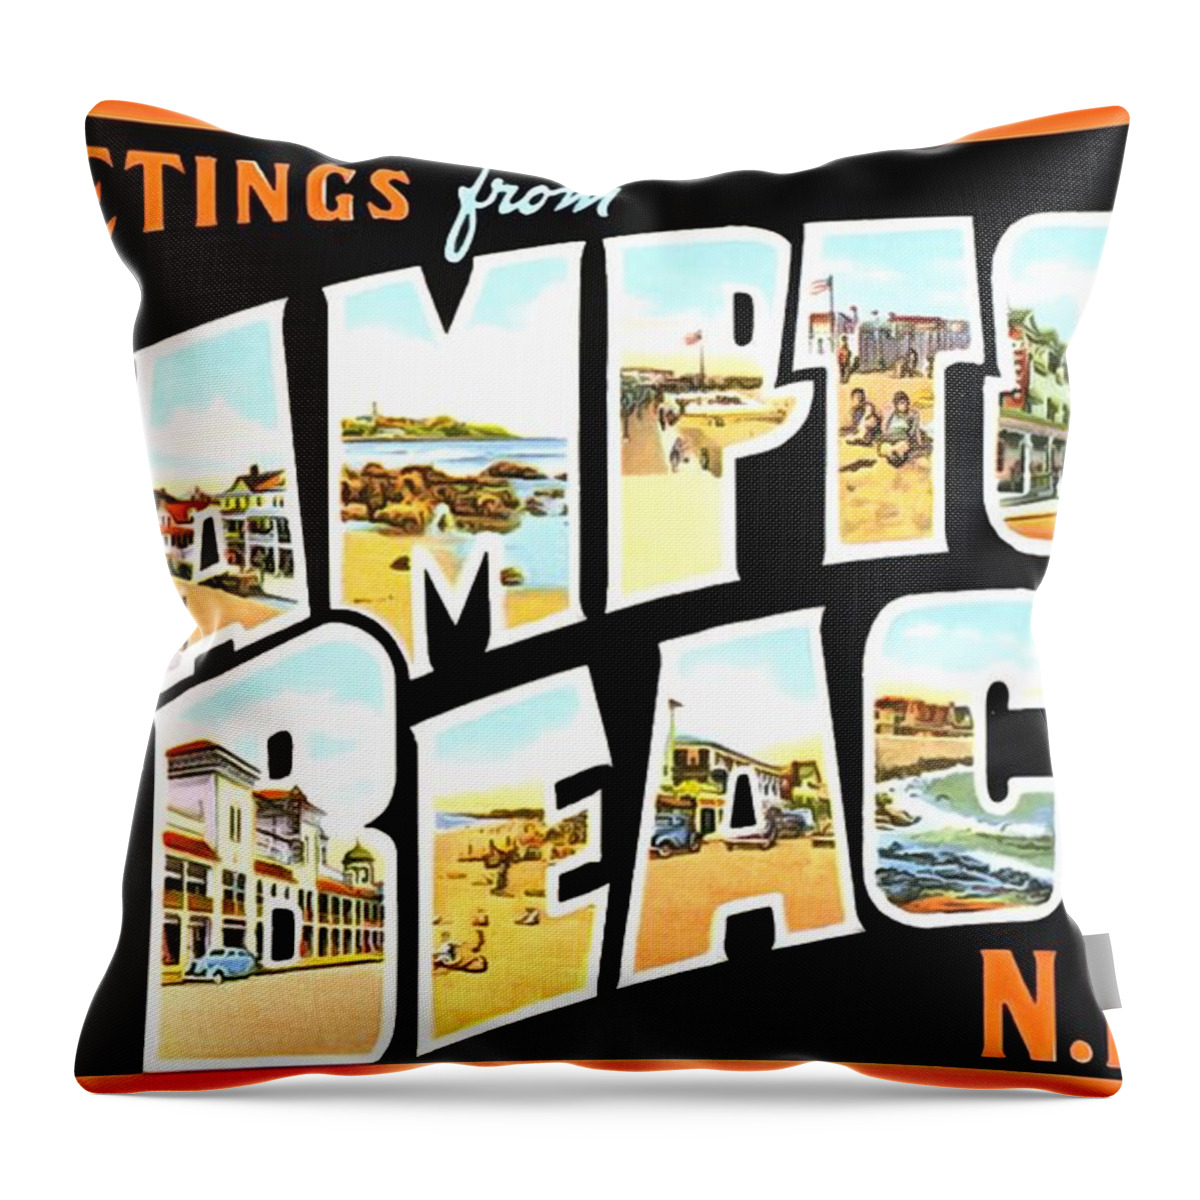 Vintage Collections Cites And States Throw Pillow featuring the photograph Greetings From Hampton Beach New Hampshire by Vintage Collections Cites and States